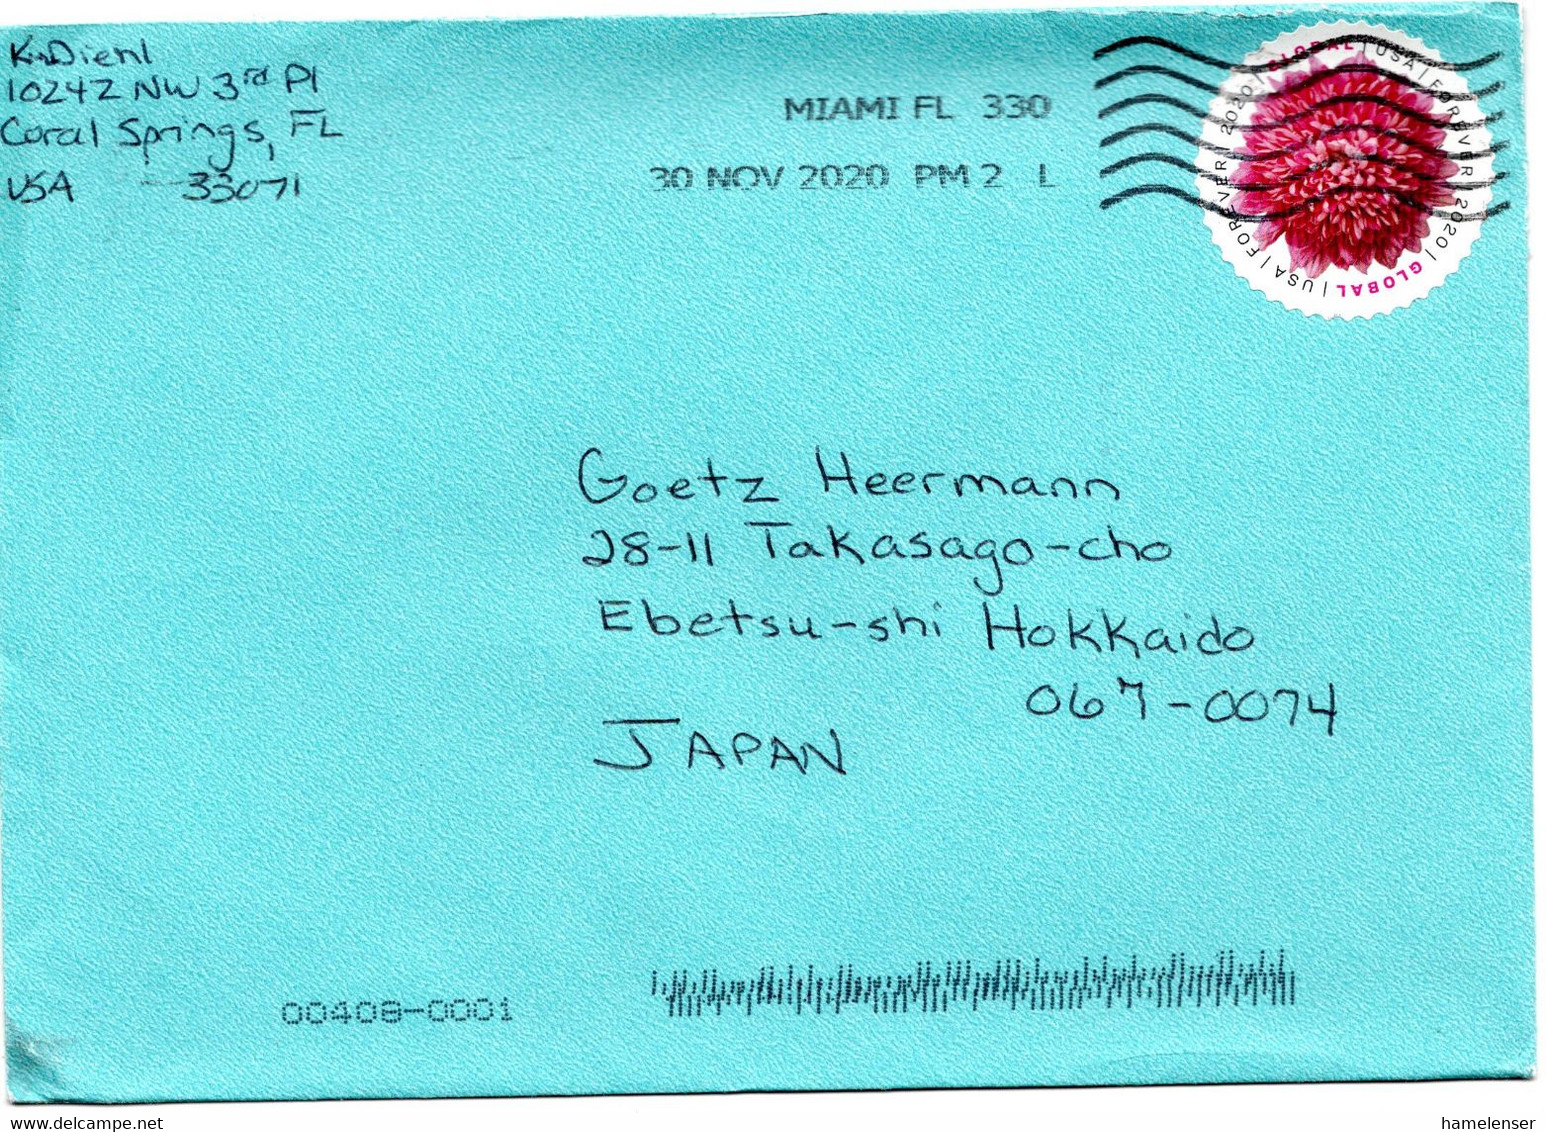 59606 - USA - 2020 - "Global Forever" '20 EF A Bf MIAMI FL 330 -> Japan - Lettres & Documents